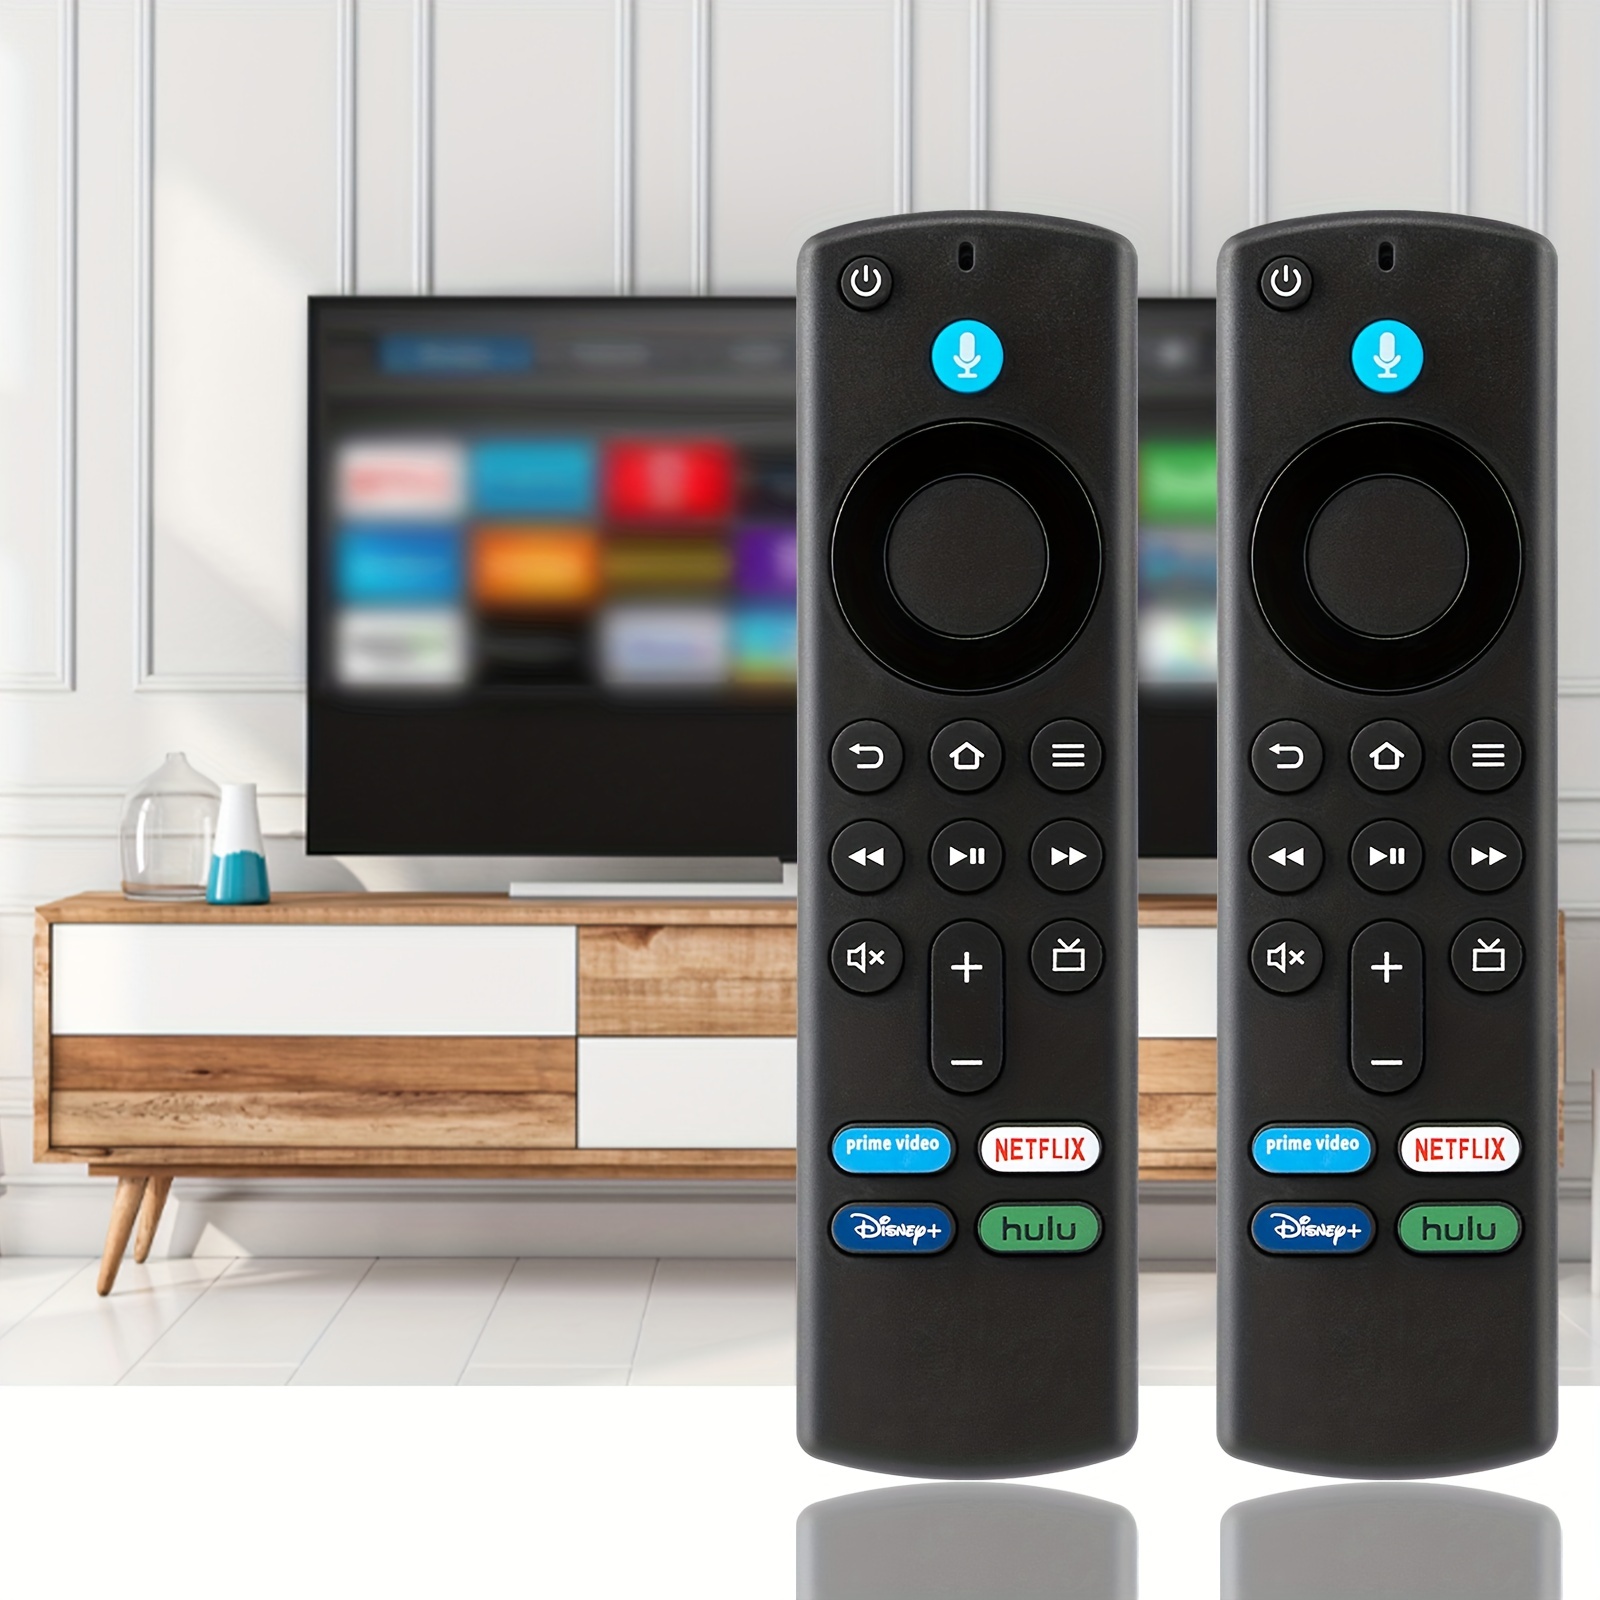  BroadLink Smart Remote Control Hub RM4 mini with TV LED  Backlights, All in One Control TV, LED Strip Lights, Air Conditioner,  Compatible with Alexa, Google Home, IFTTT : Tools & Home